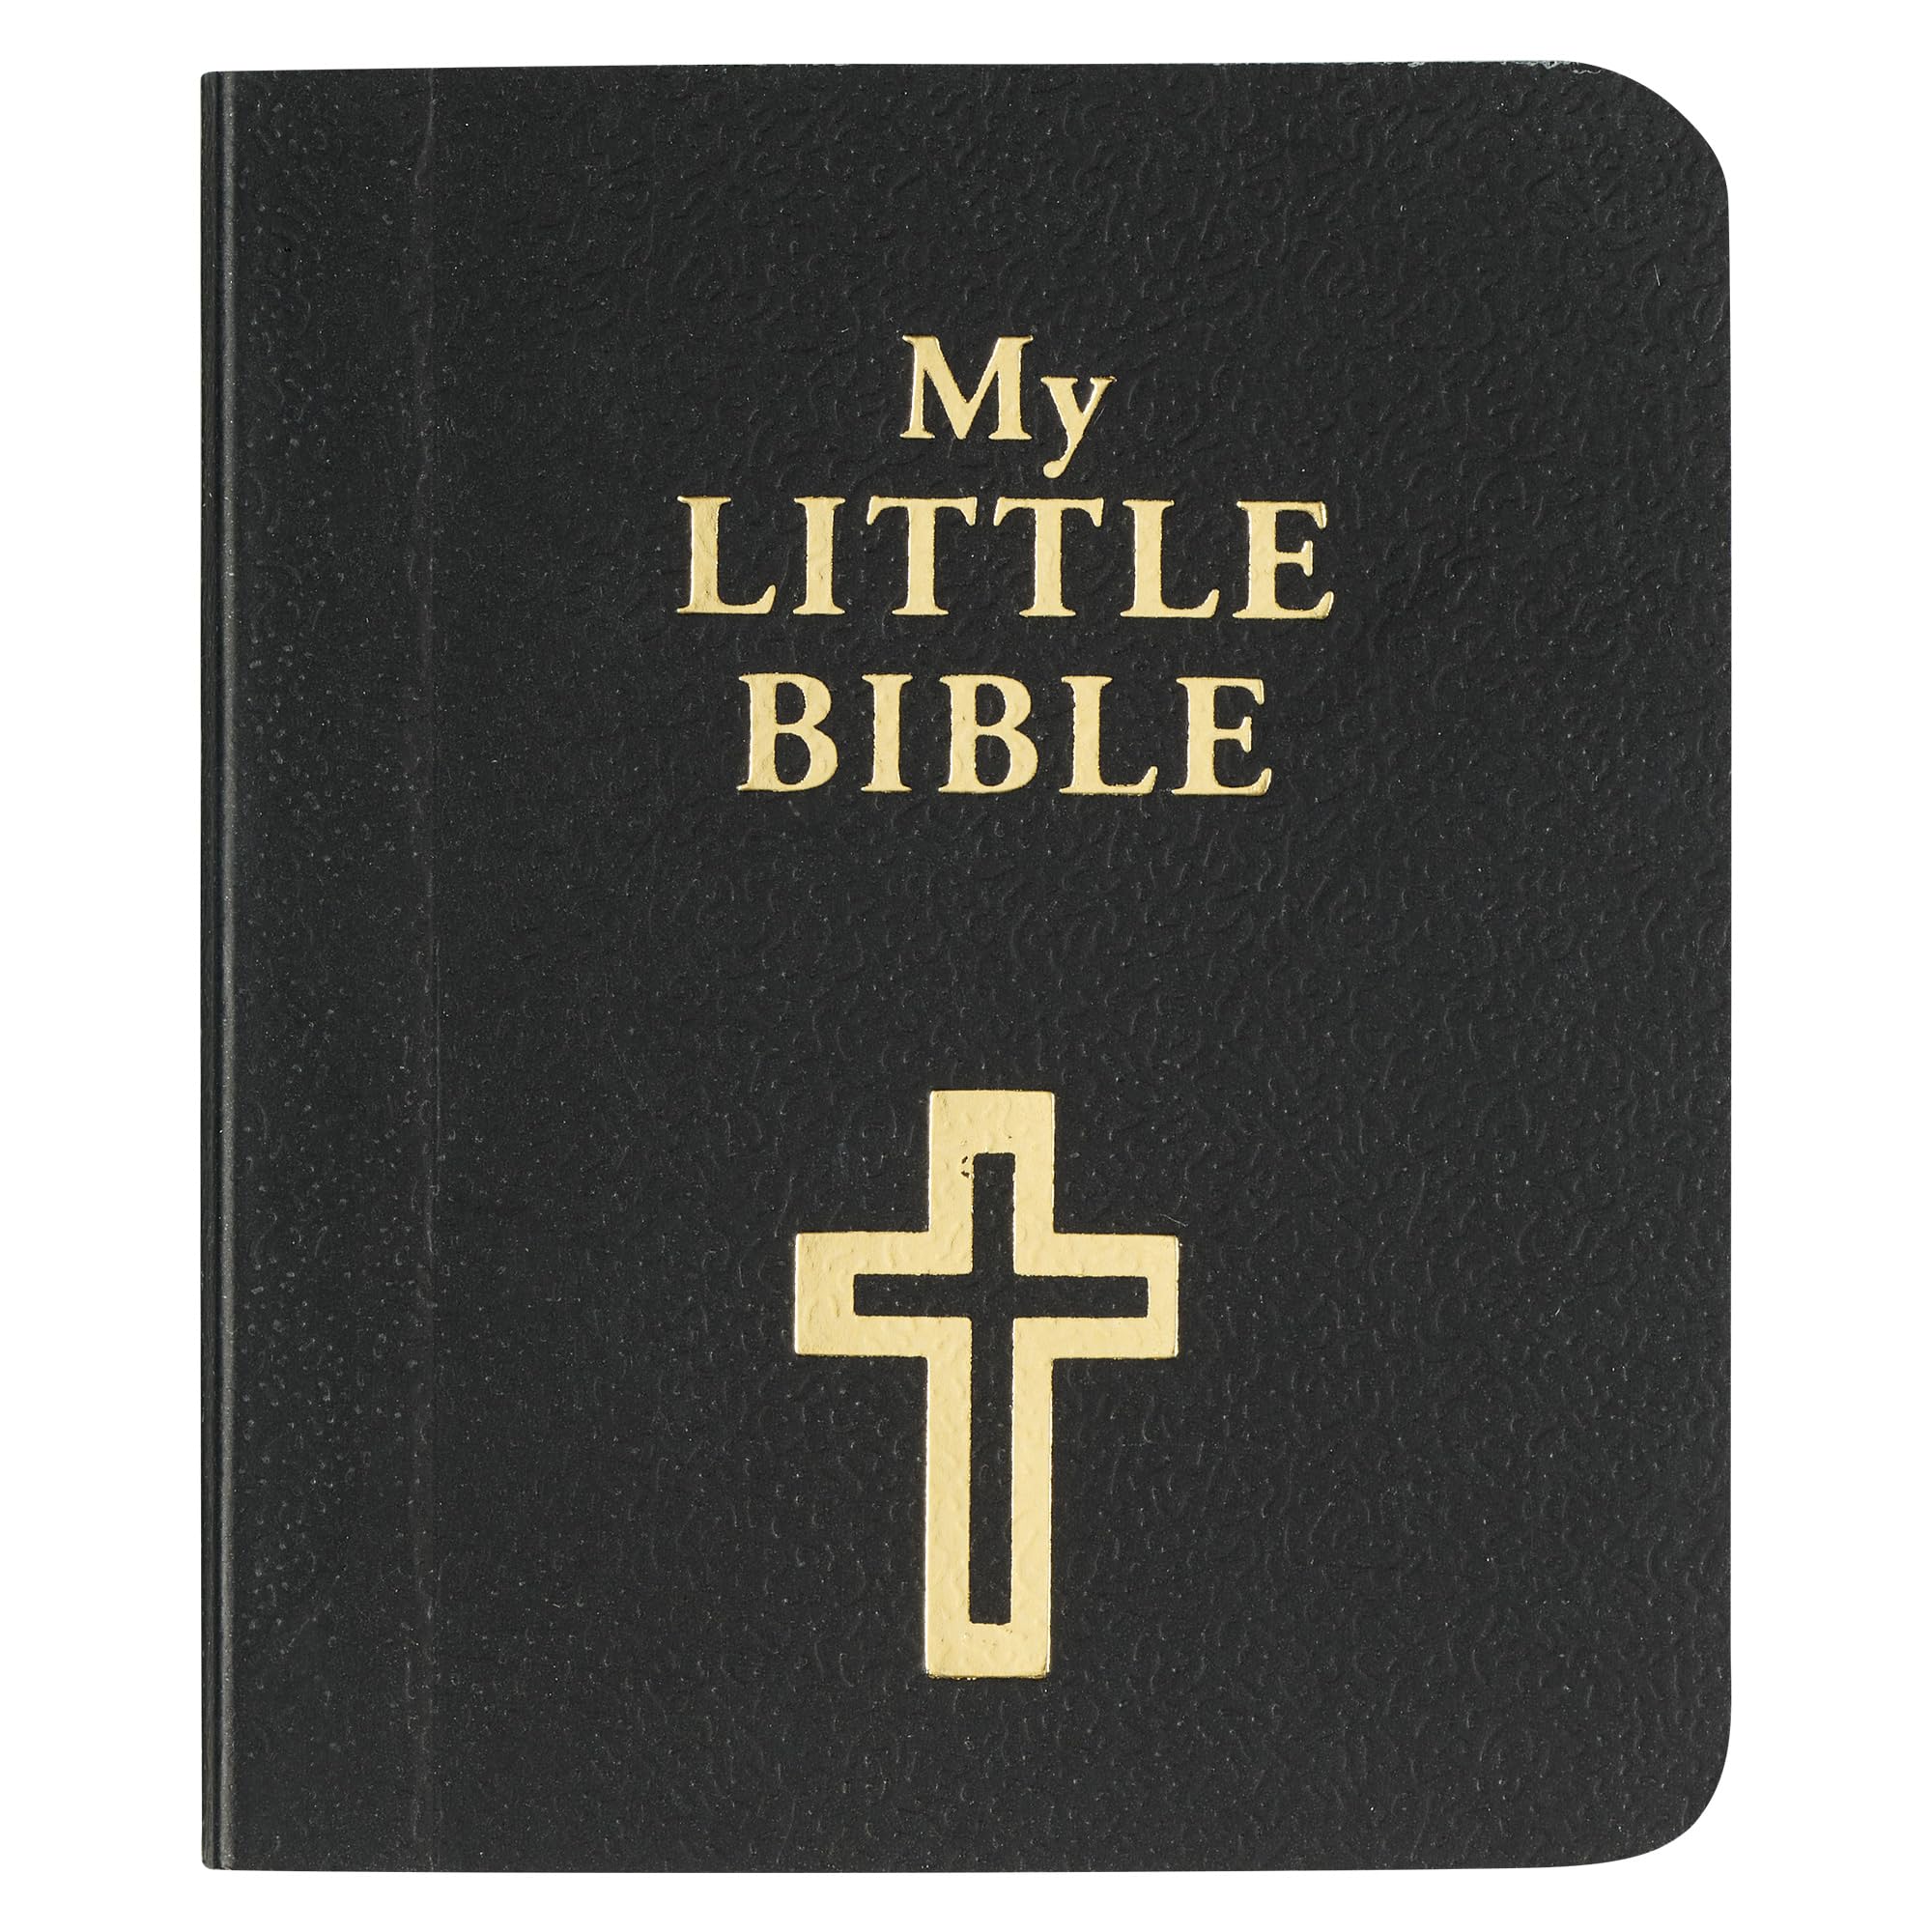 My Little Bible 2” Standard Edition - Selections of Key Verses From Every Book, Tiny Palm-size OT NT Scripture for Ministry Outreach, Classic 1769 KJV Text, 2" x 2.5”, Black